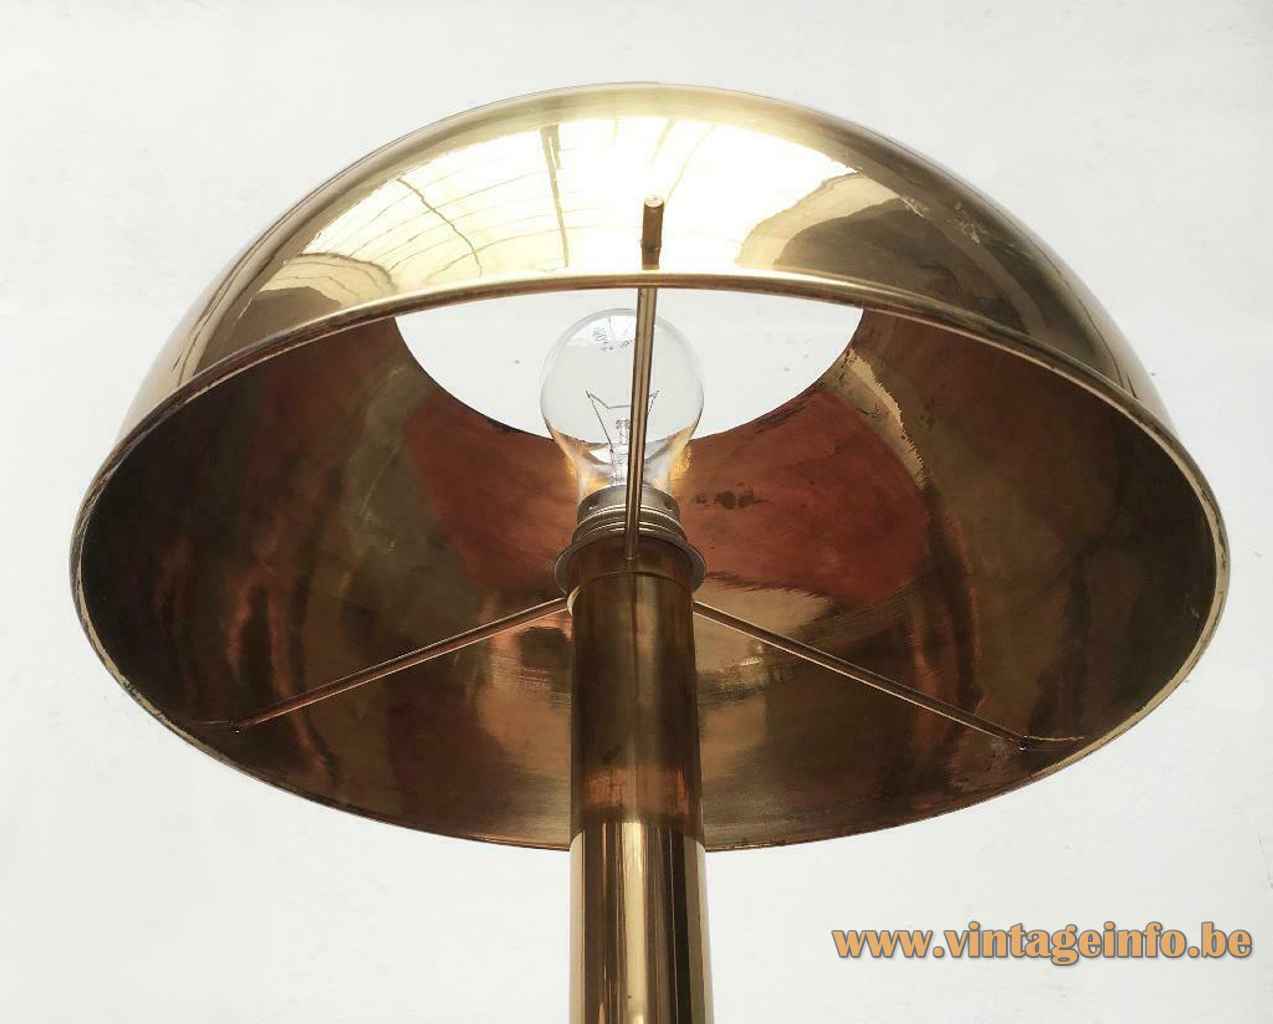 Florian Schultz brass table lamp inside view round mushroom lampshade metal E27 socket 1970s 1980s Germany